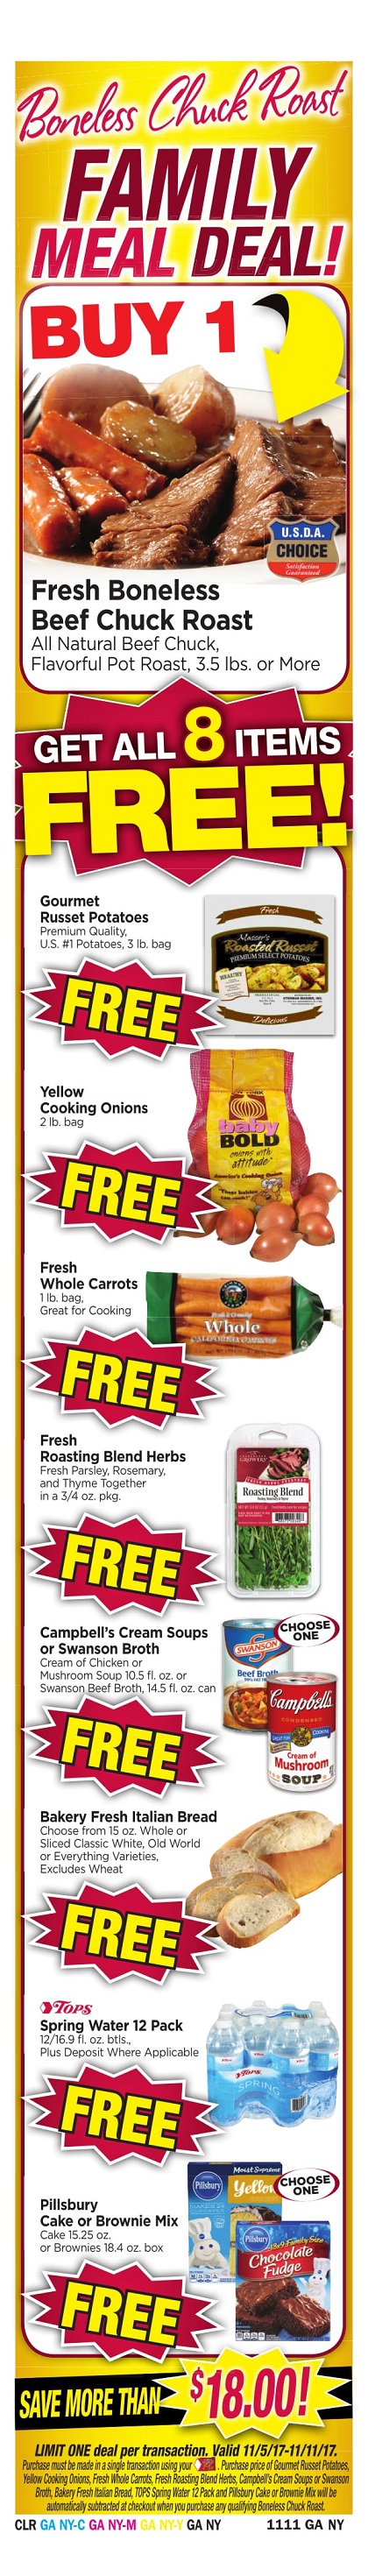 Tops Markets Ad Scan Week 11 5 Meal Deal